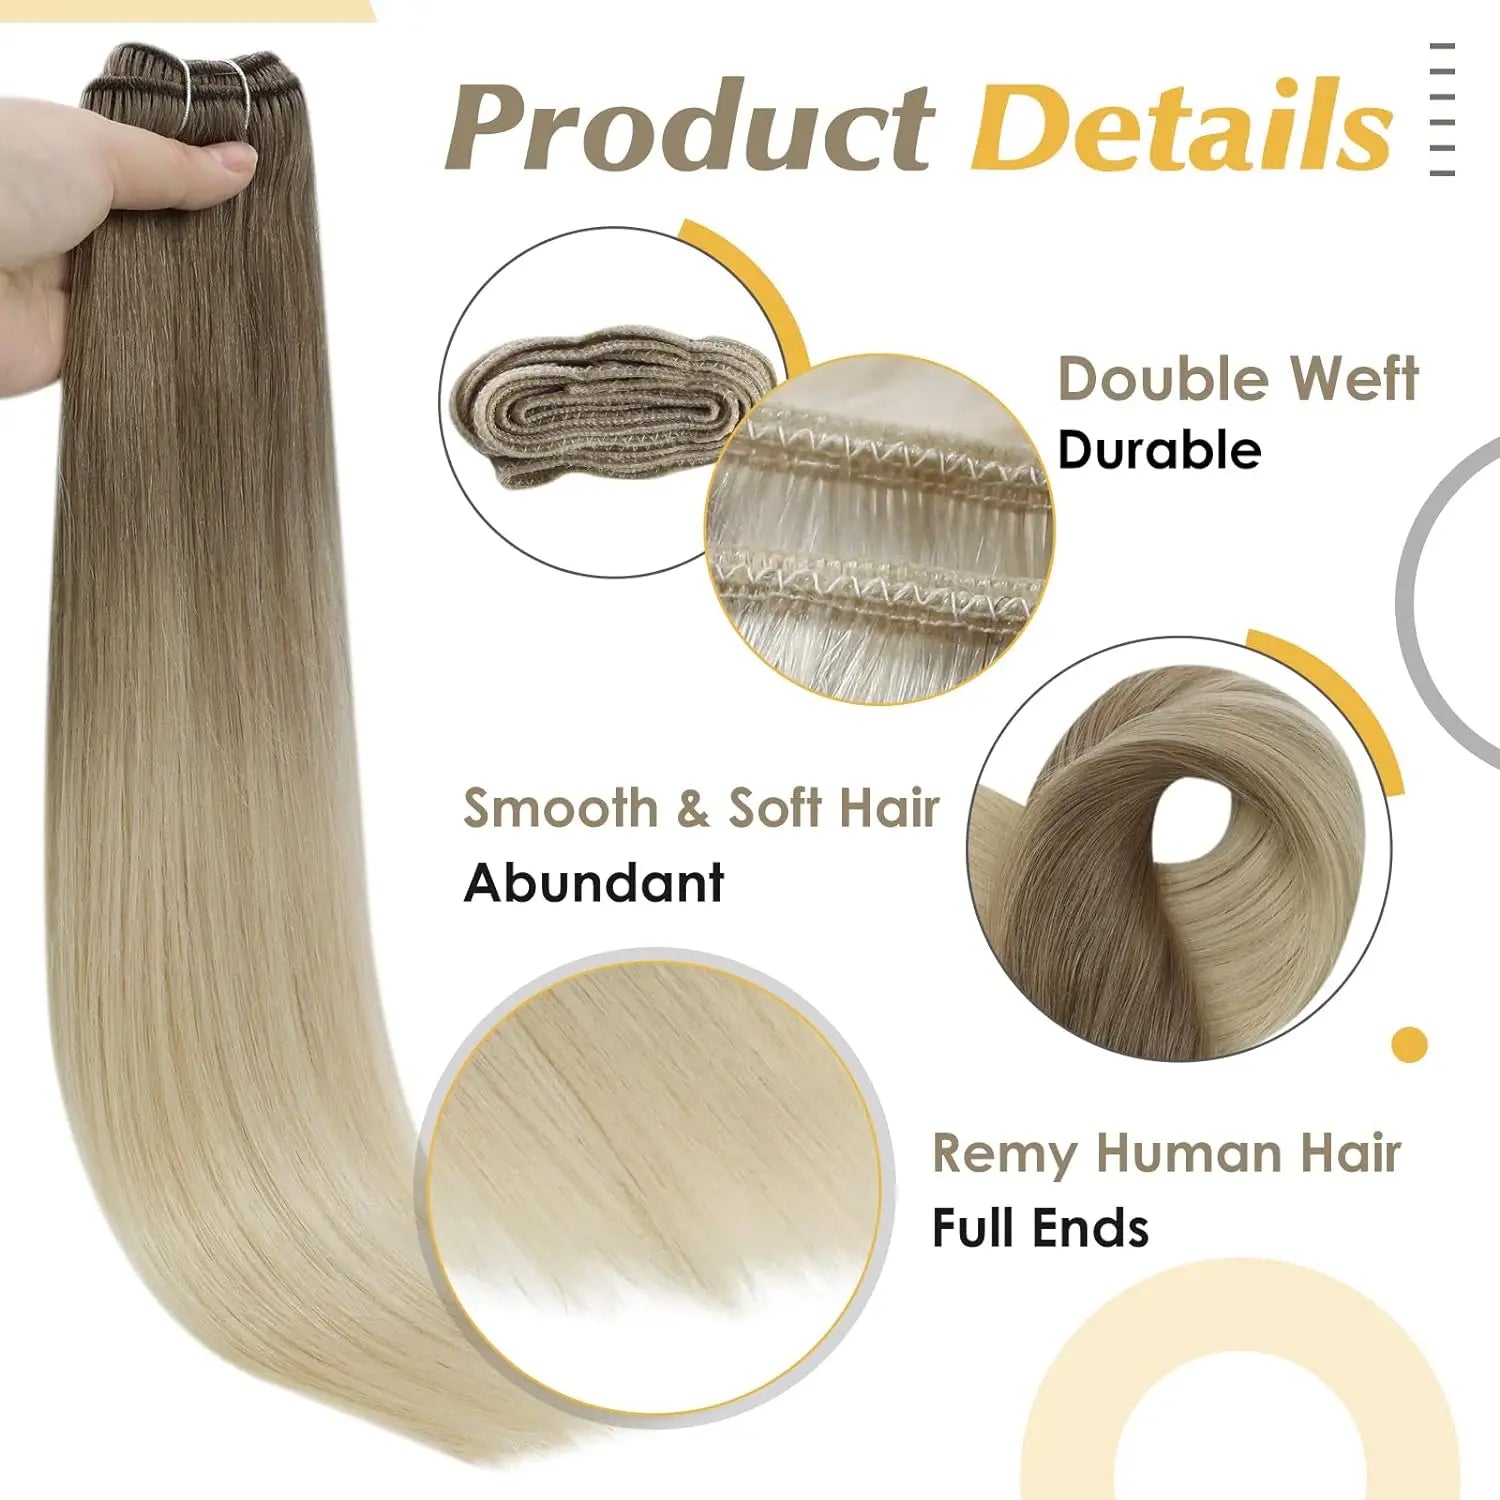 Remy Russian Weft Hair Extensions: 100% Natural Hair